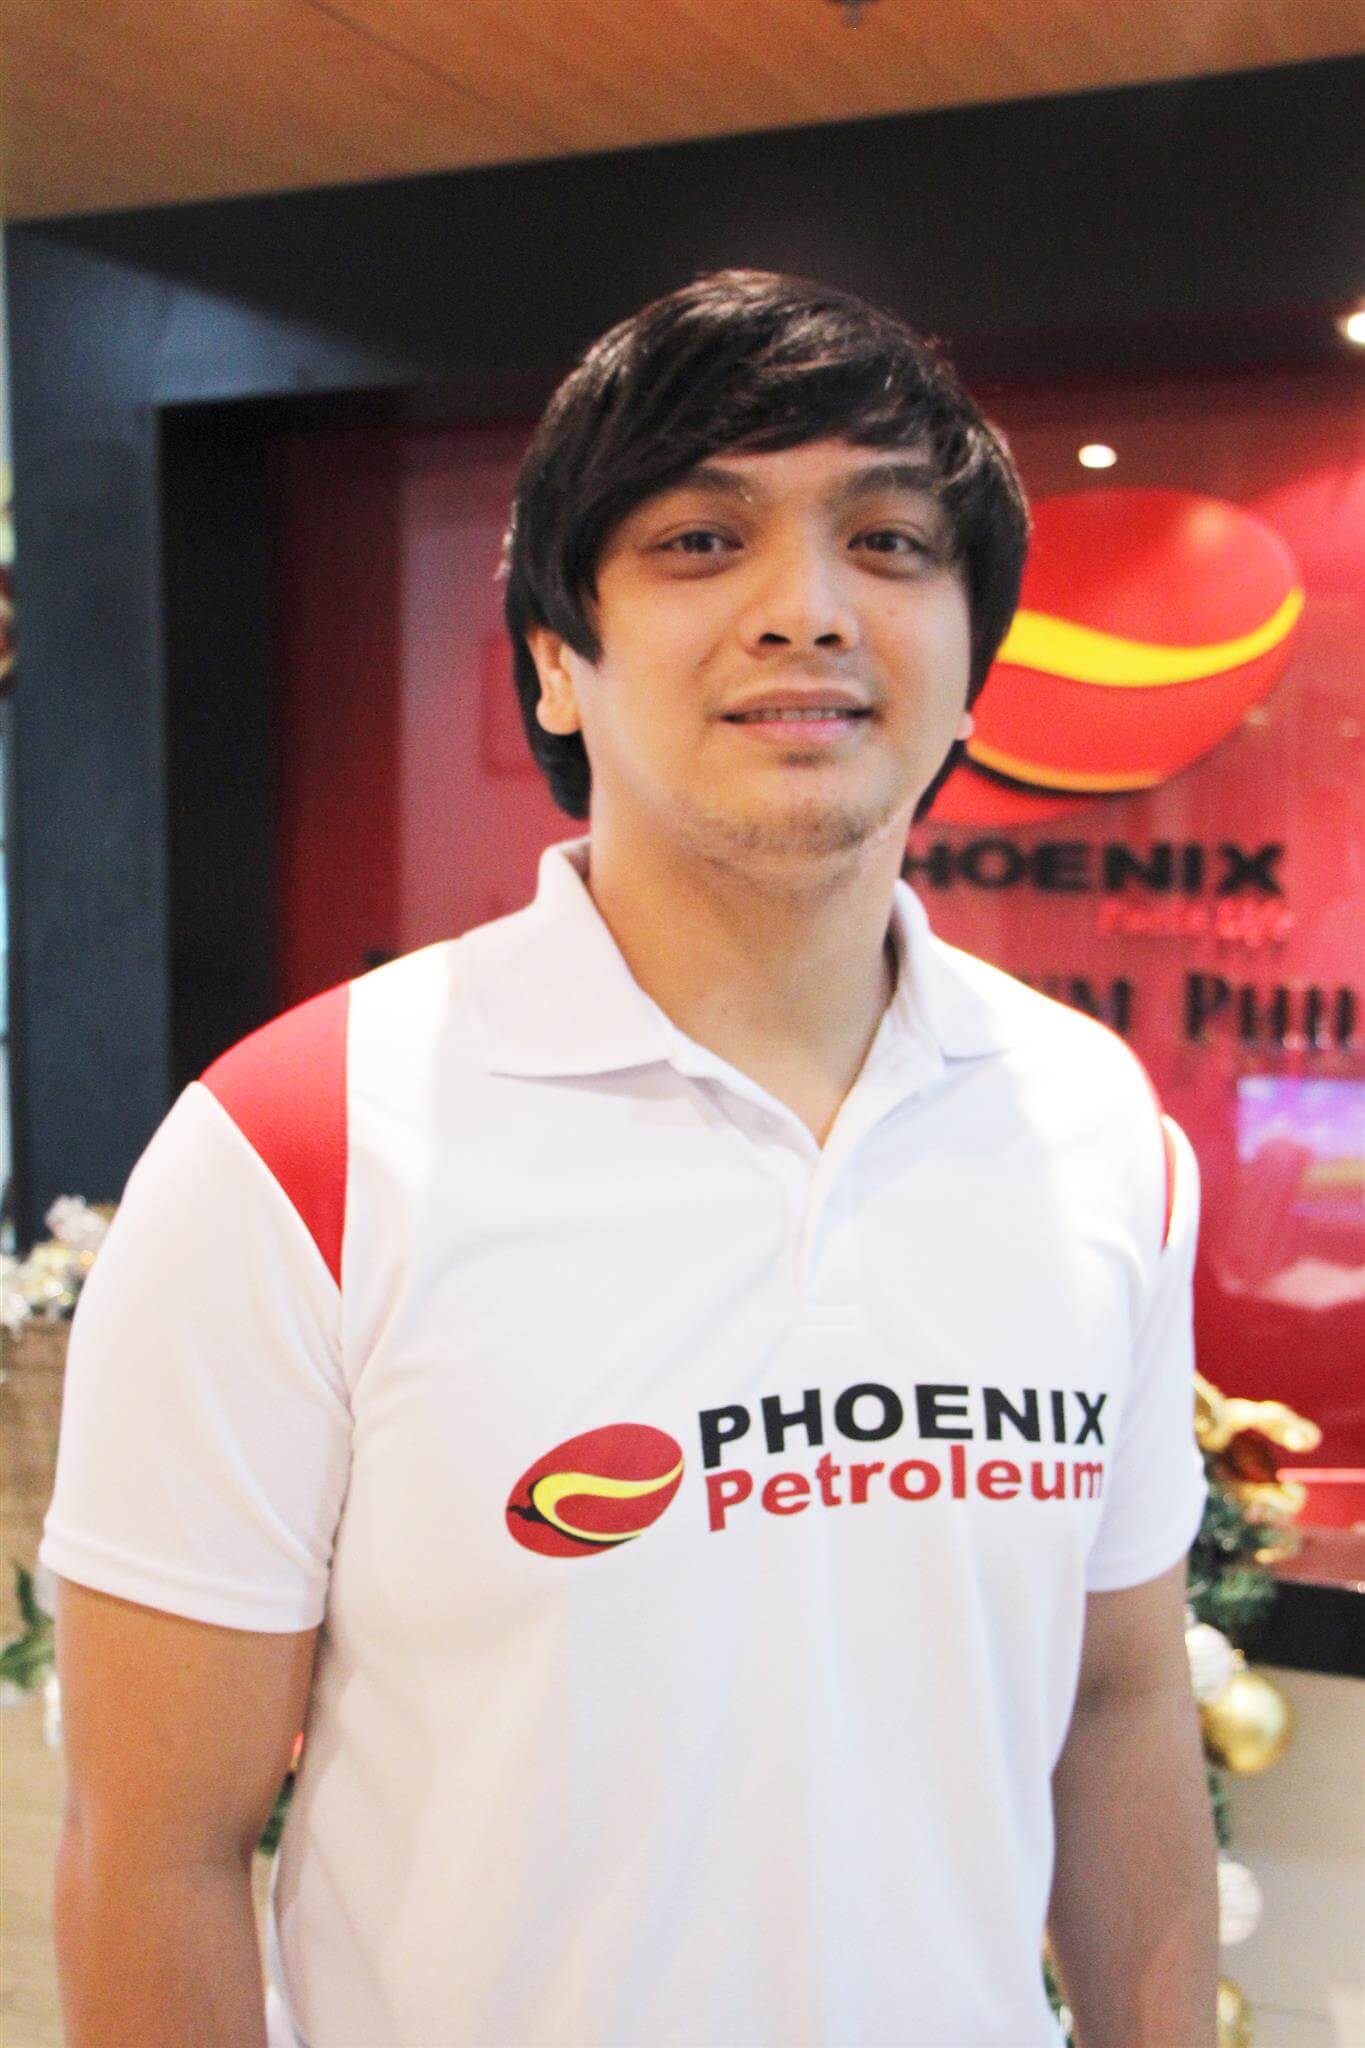 Have a Career with Phoenix Petroleum Philippines - leading oil company